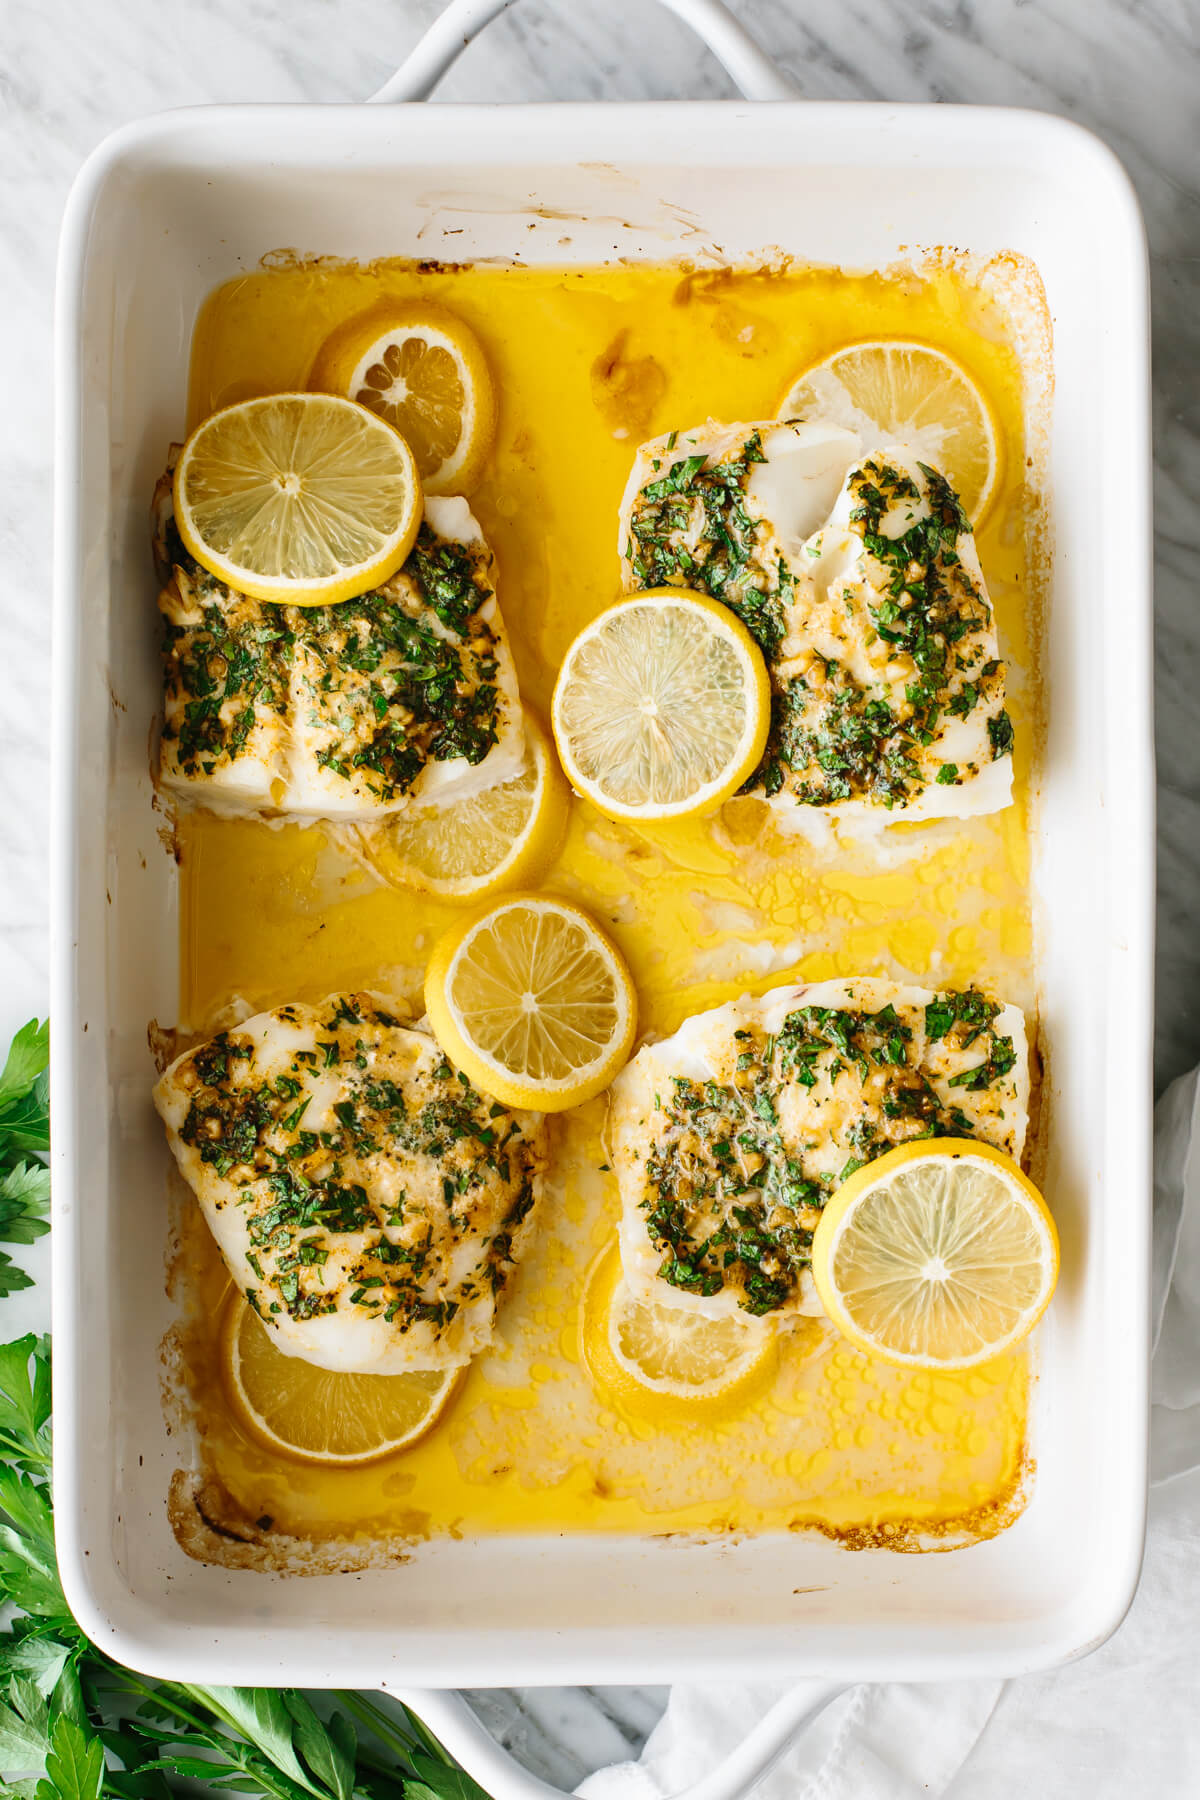 Four baked cod filets in a white casserole dish.